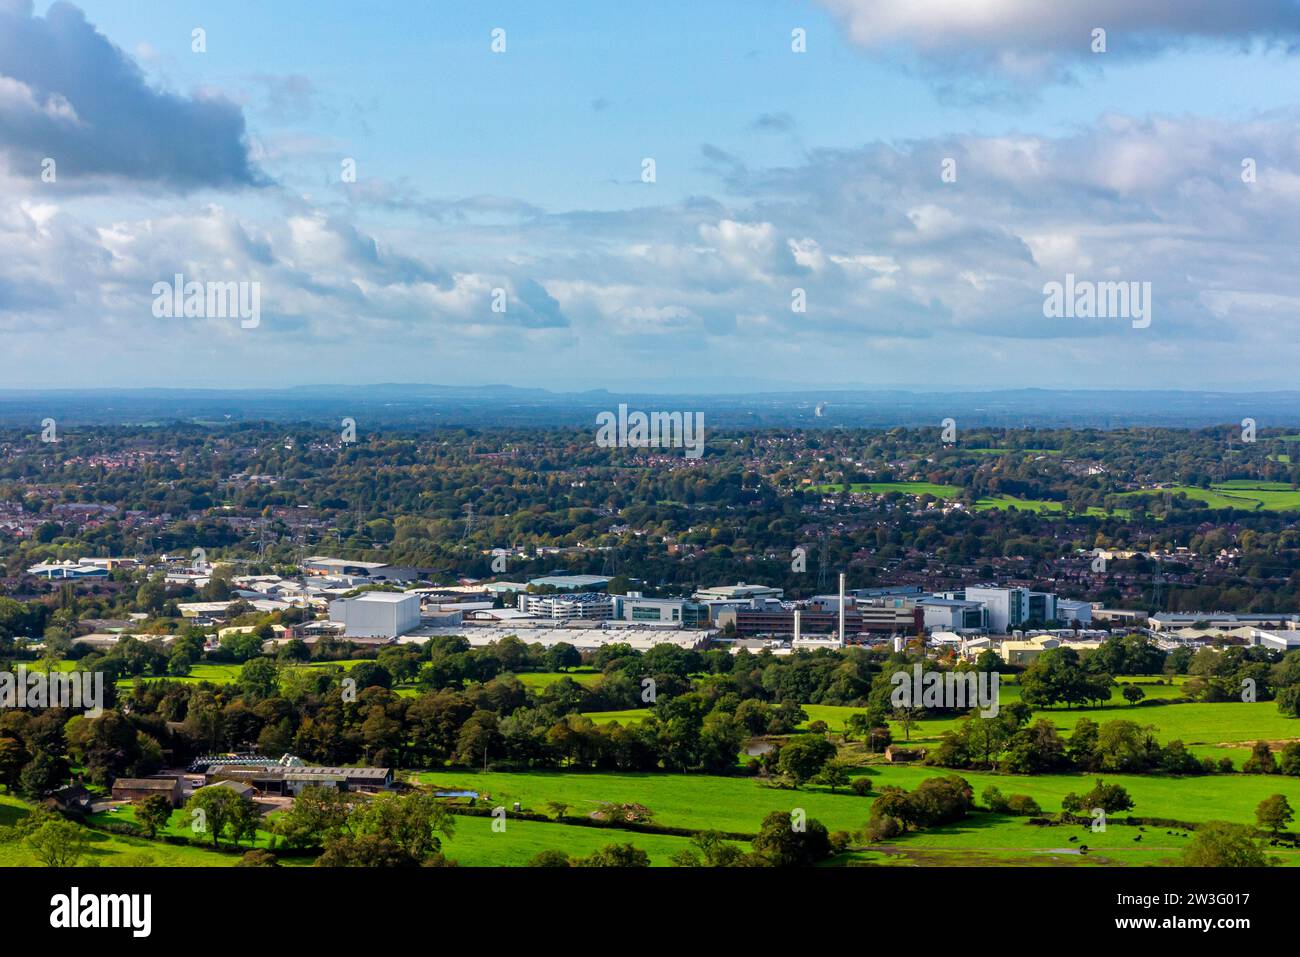 View looking down on the Astra Zeneca factory in Macclesfield Cheshire England UK with the Cheshire Plain and Jodrell Bank visible in the distance. Stock Photo